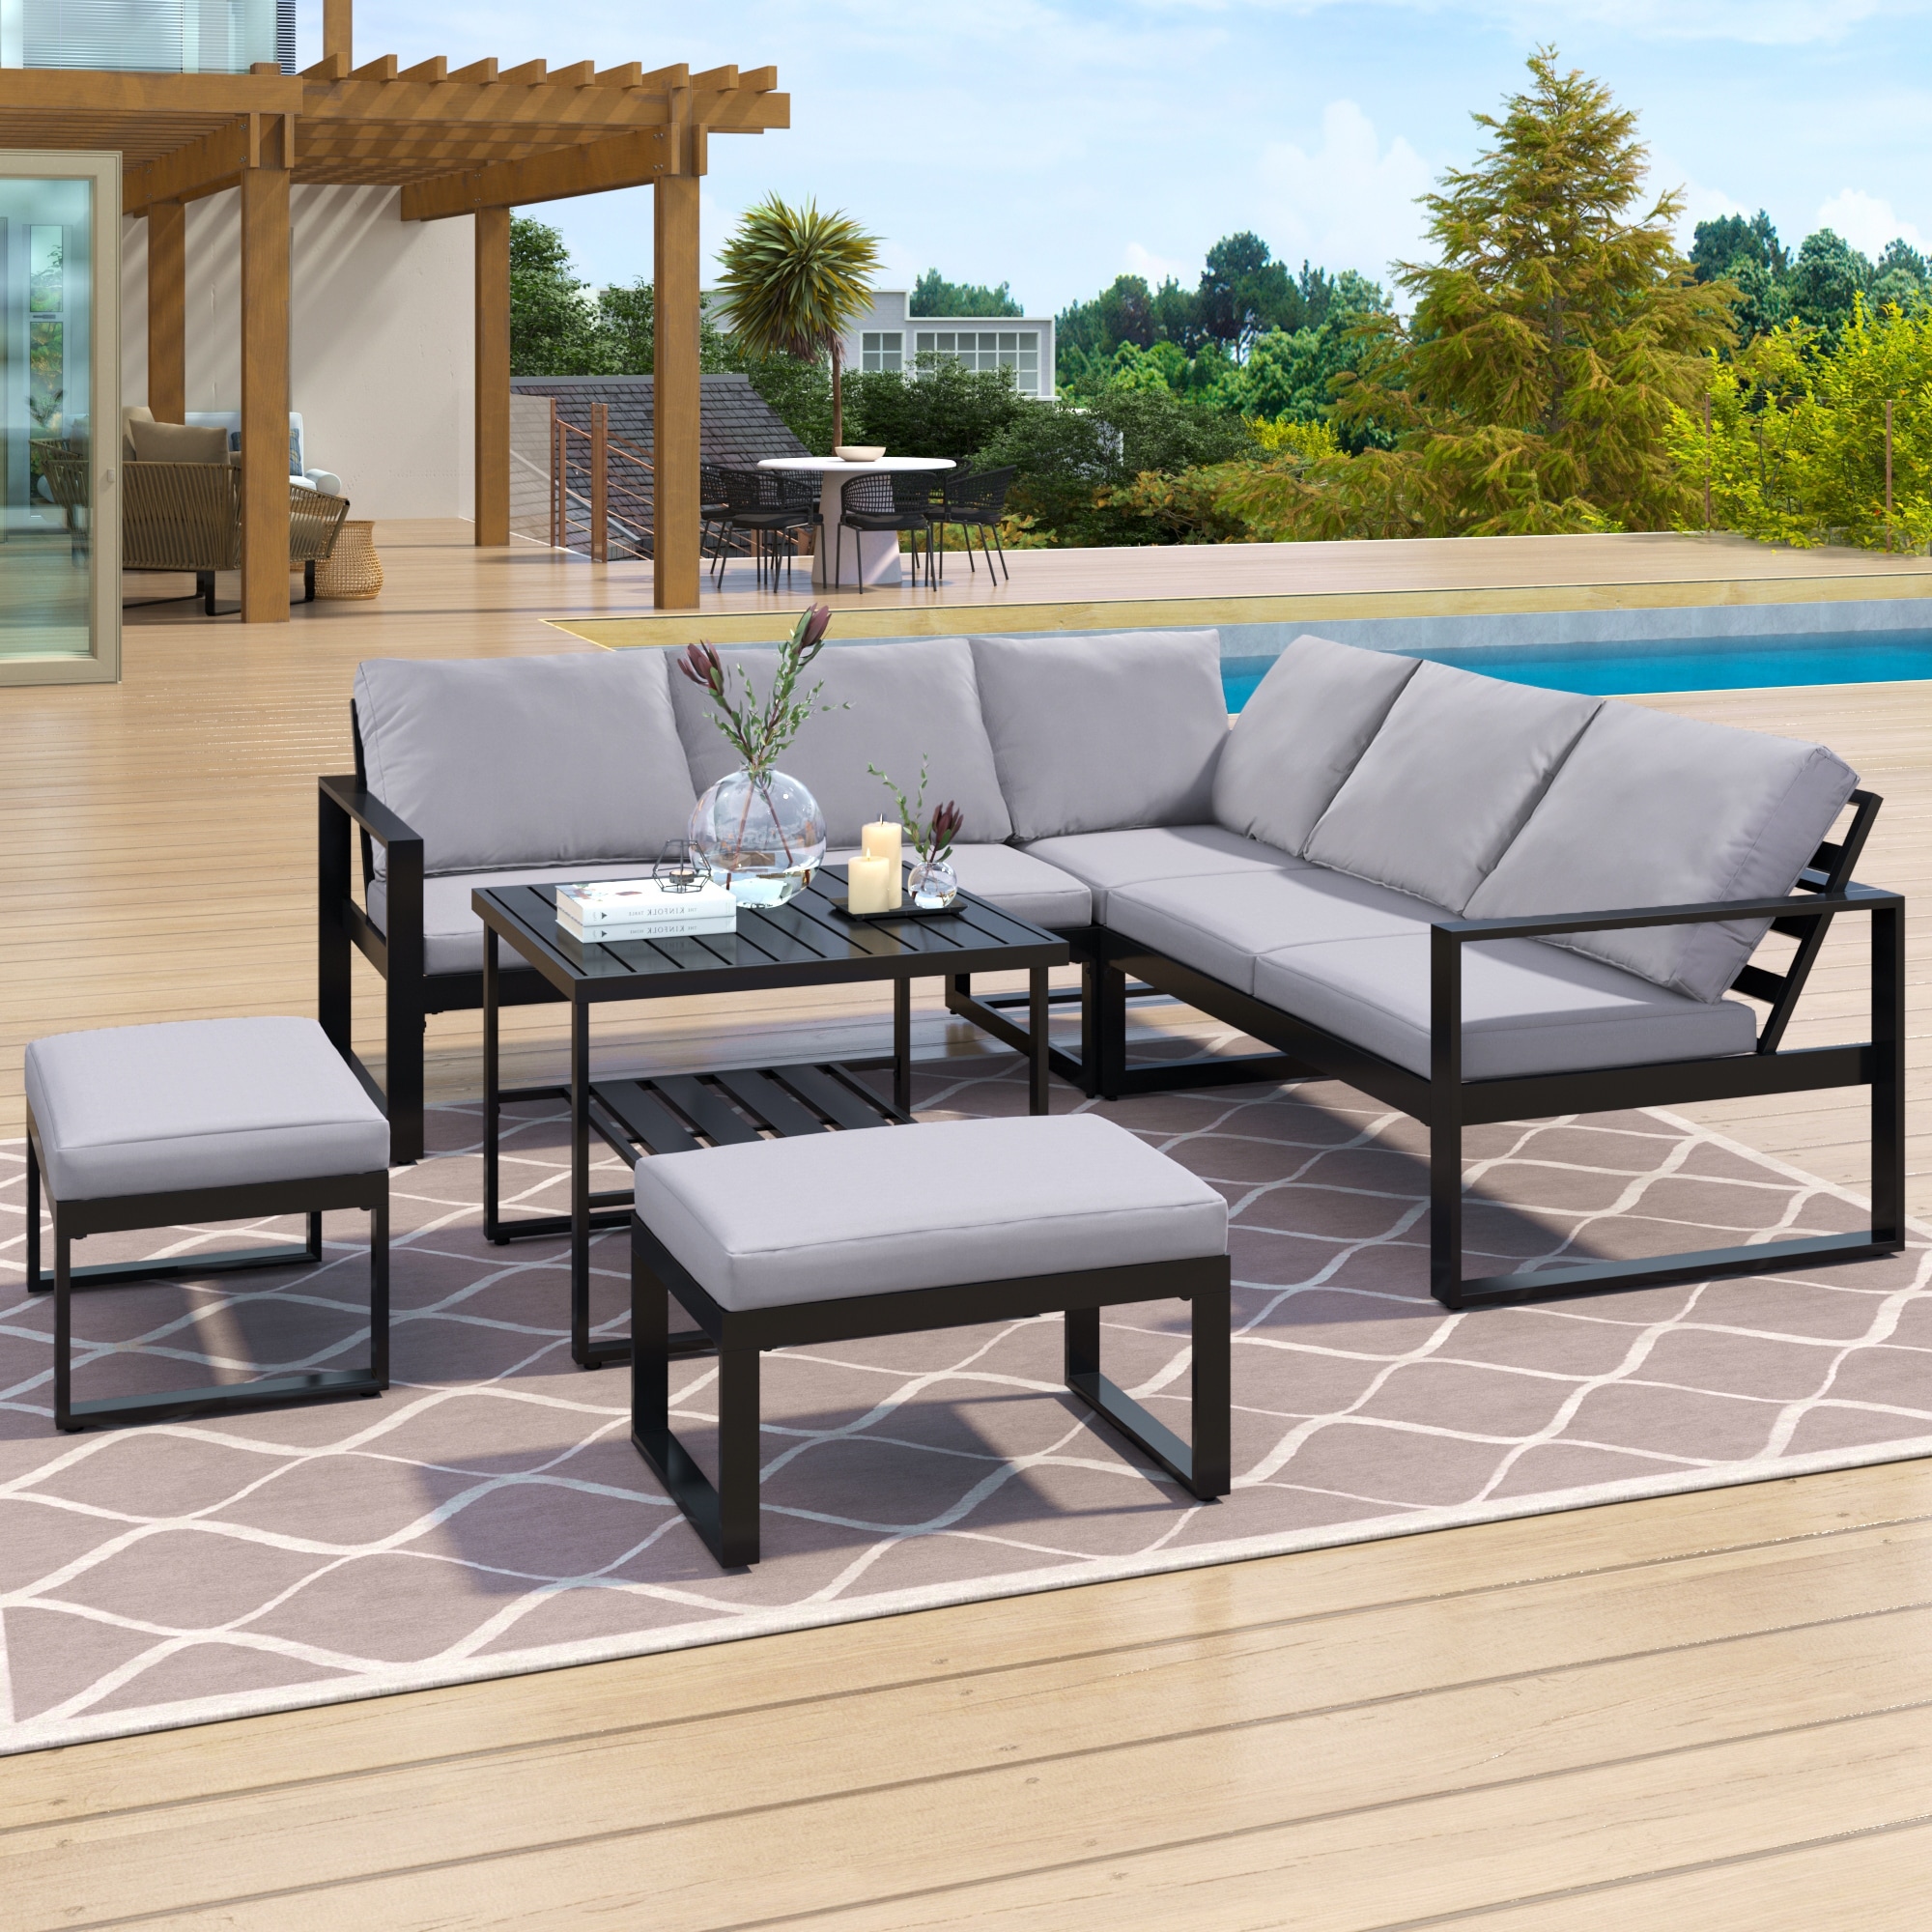 Outdoor Sofa Combination Set With 2 Love Sofa And 1 Single Sofa and 1 Table  2 Bench